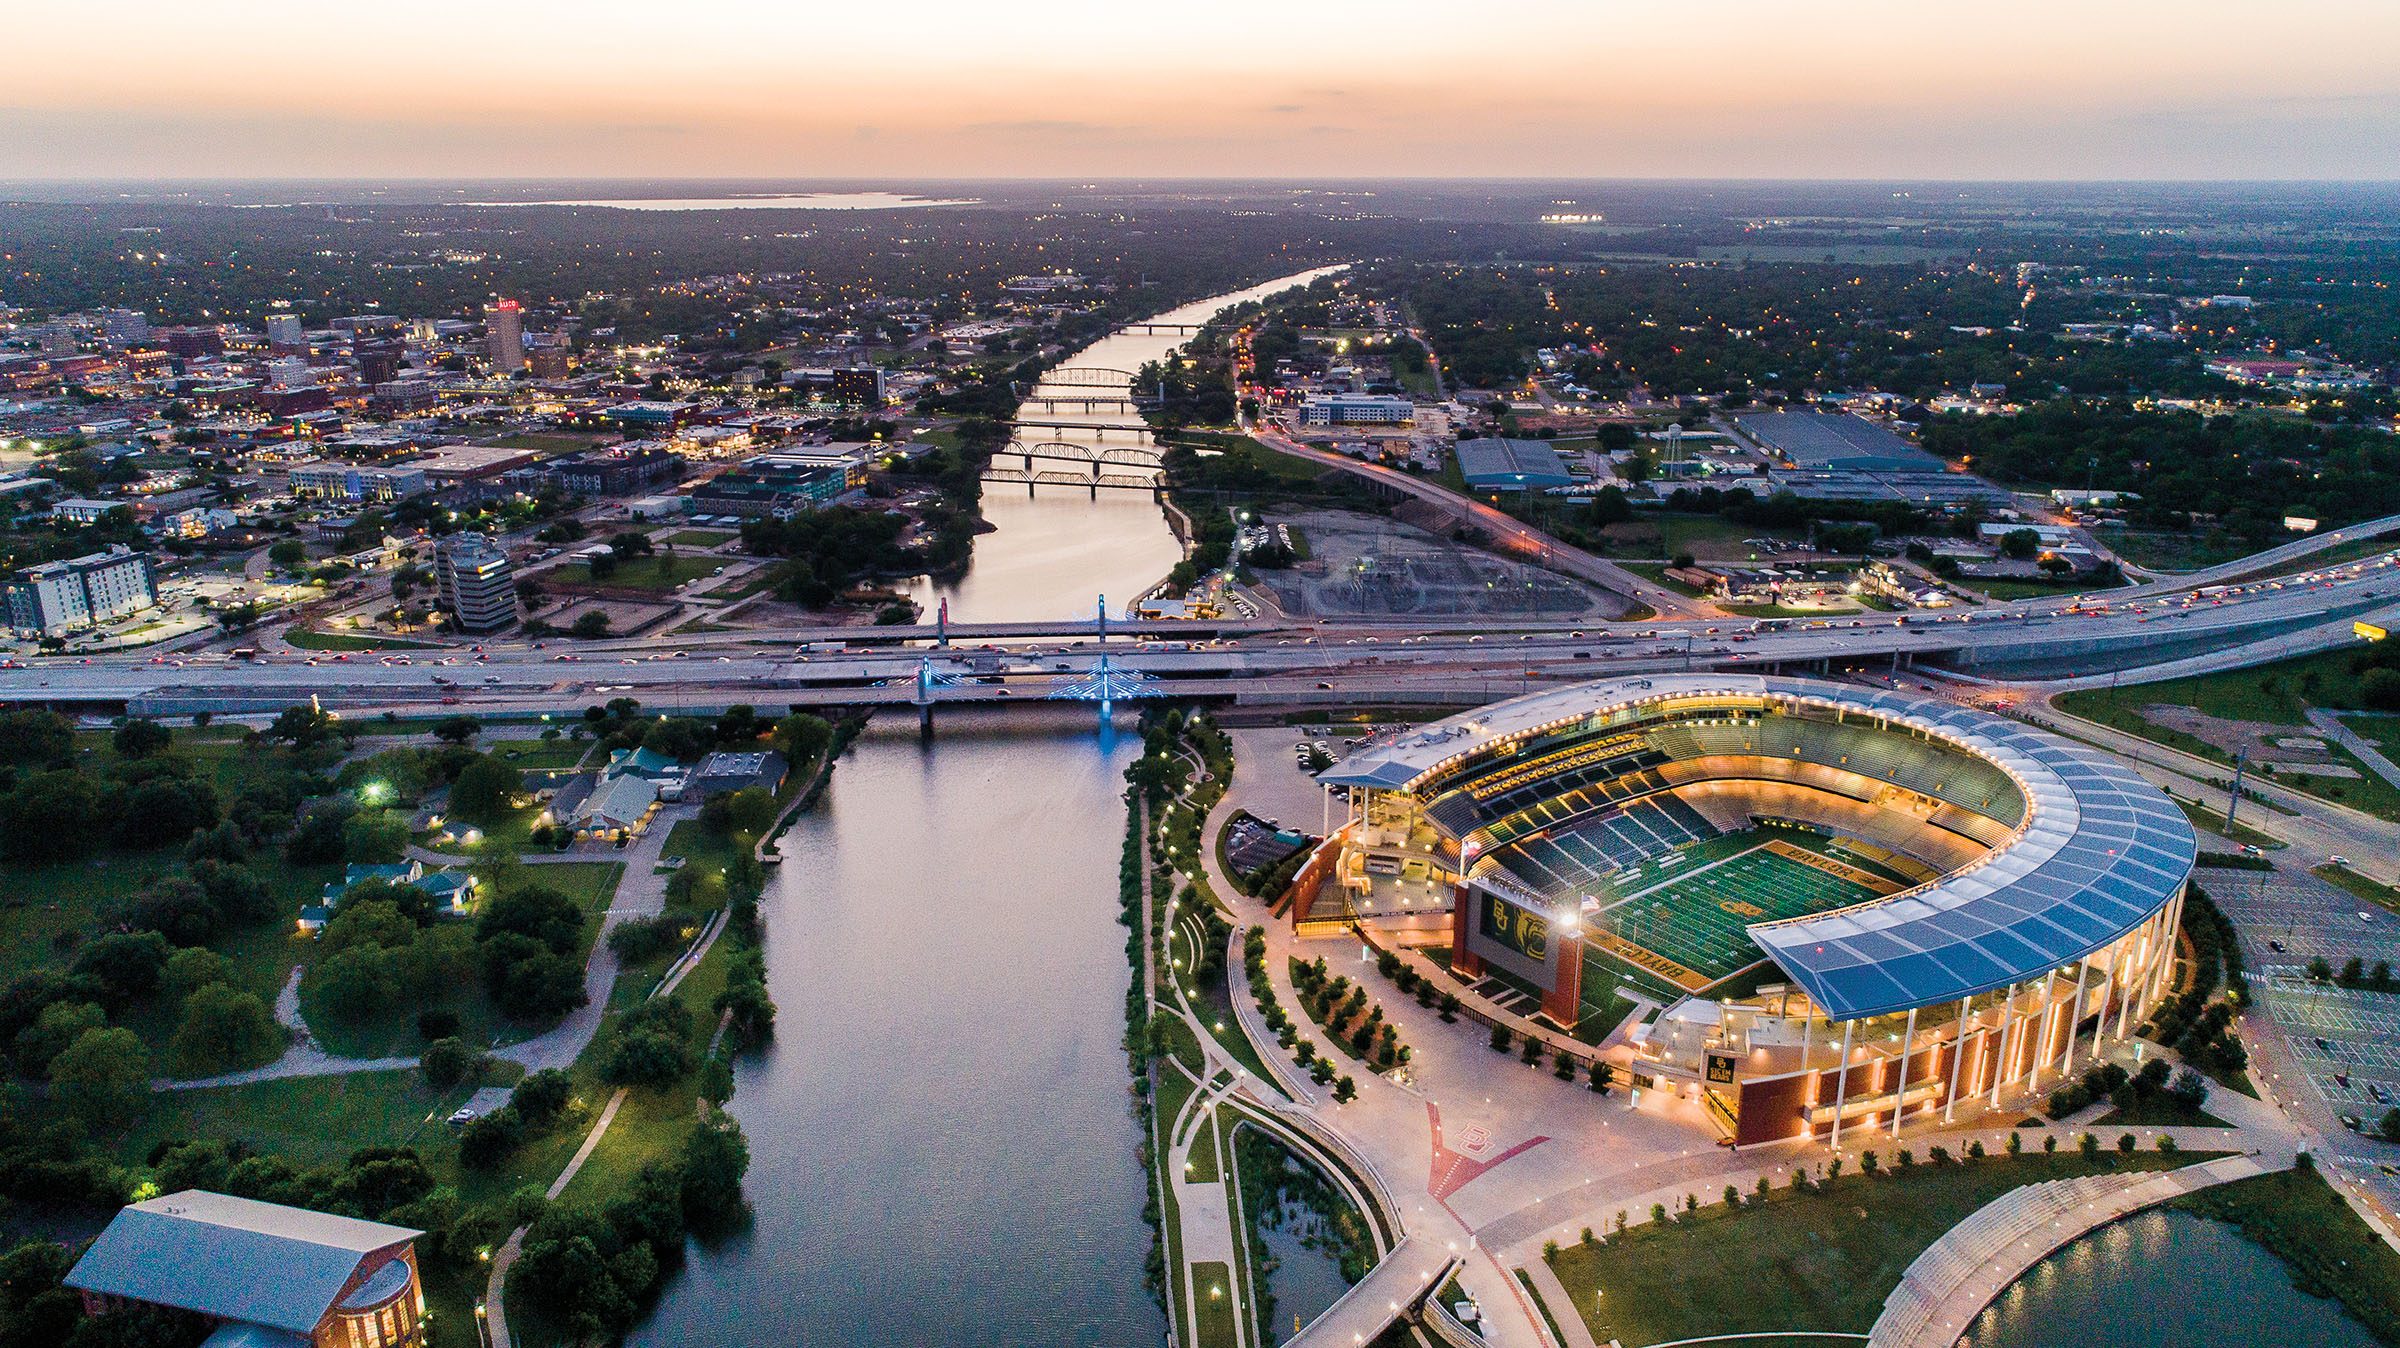 An overhead view of Waco, with Baylor stadium on the right and the Brazos river separating two sides of the city